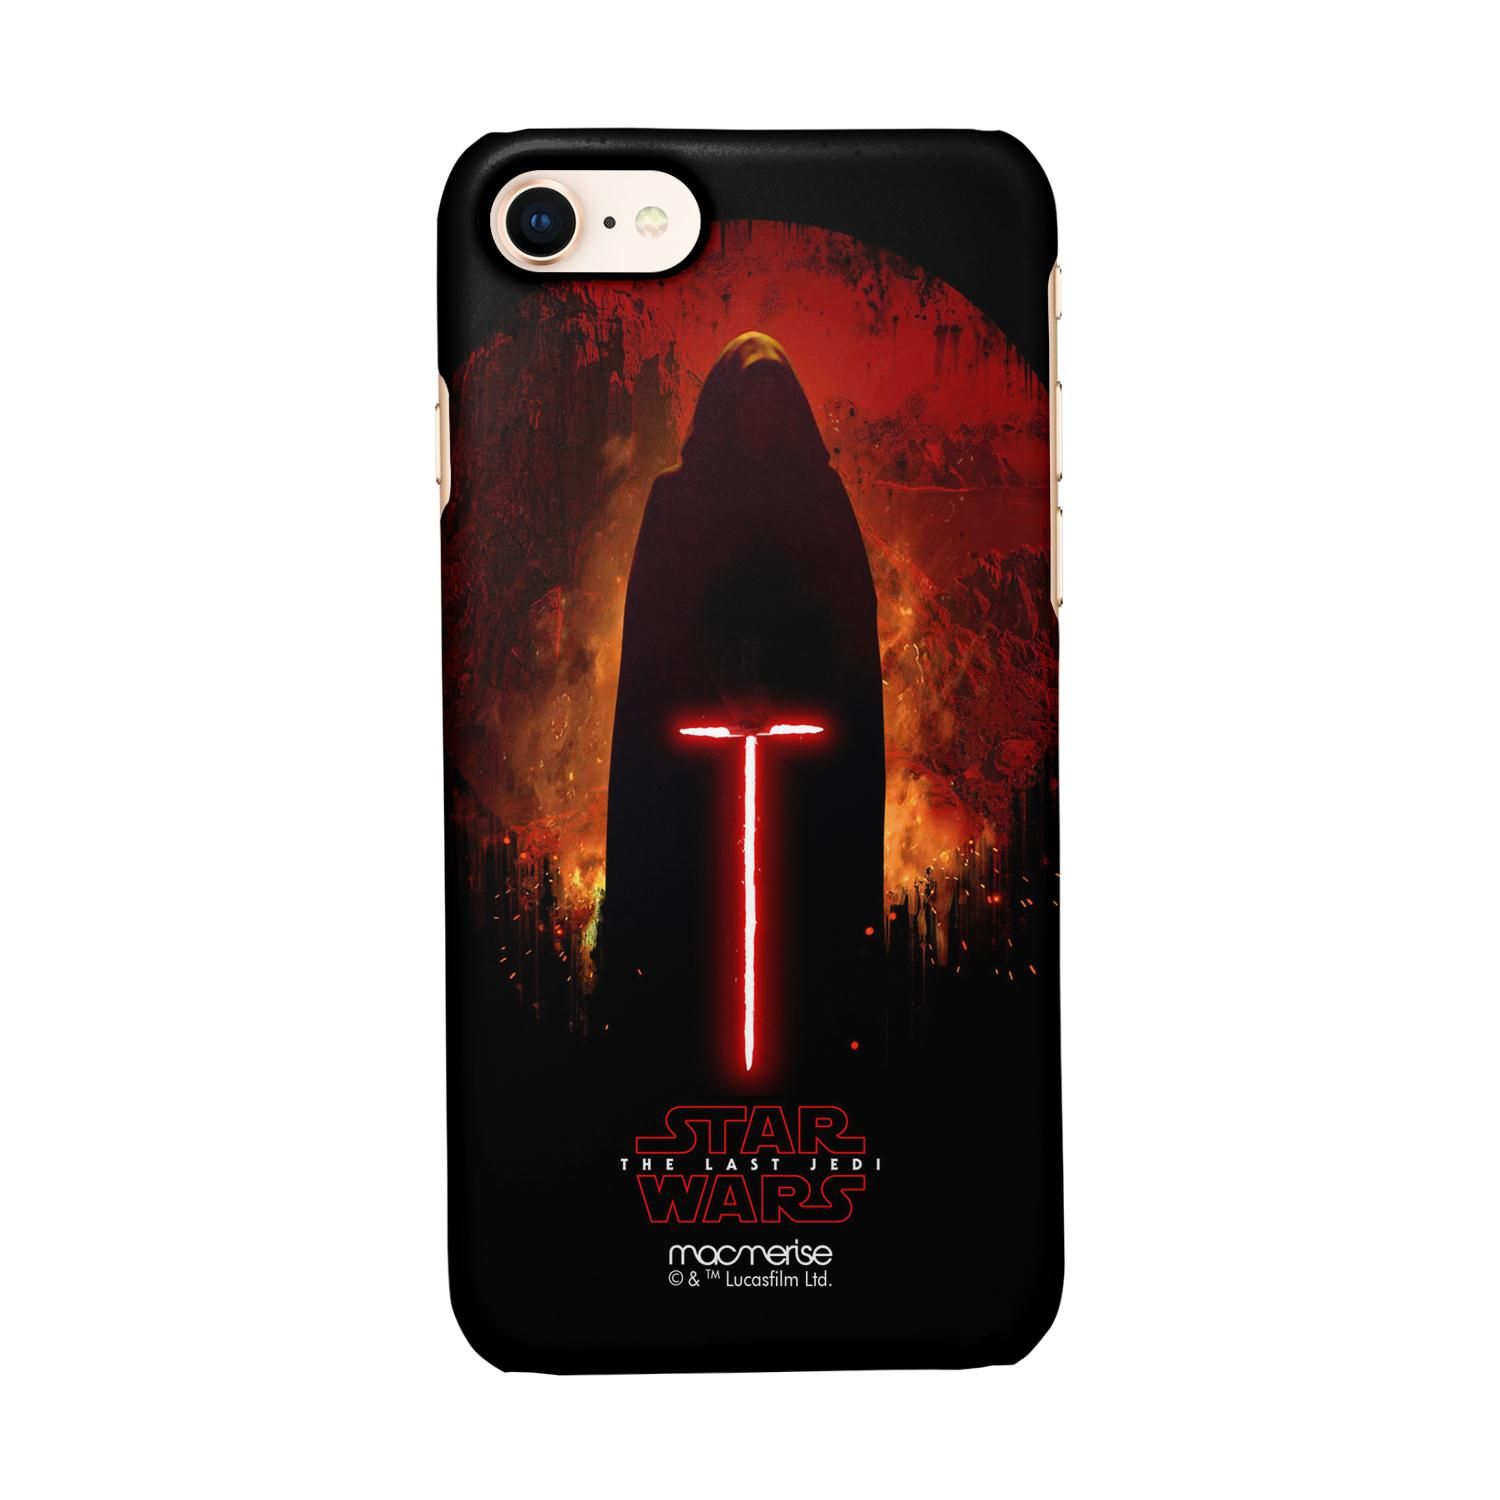 Buy Embrace The Darkness Within - Sleek Phone Case for iPhone 7 Online